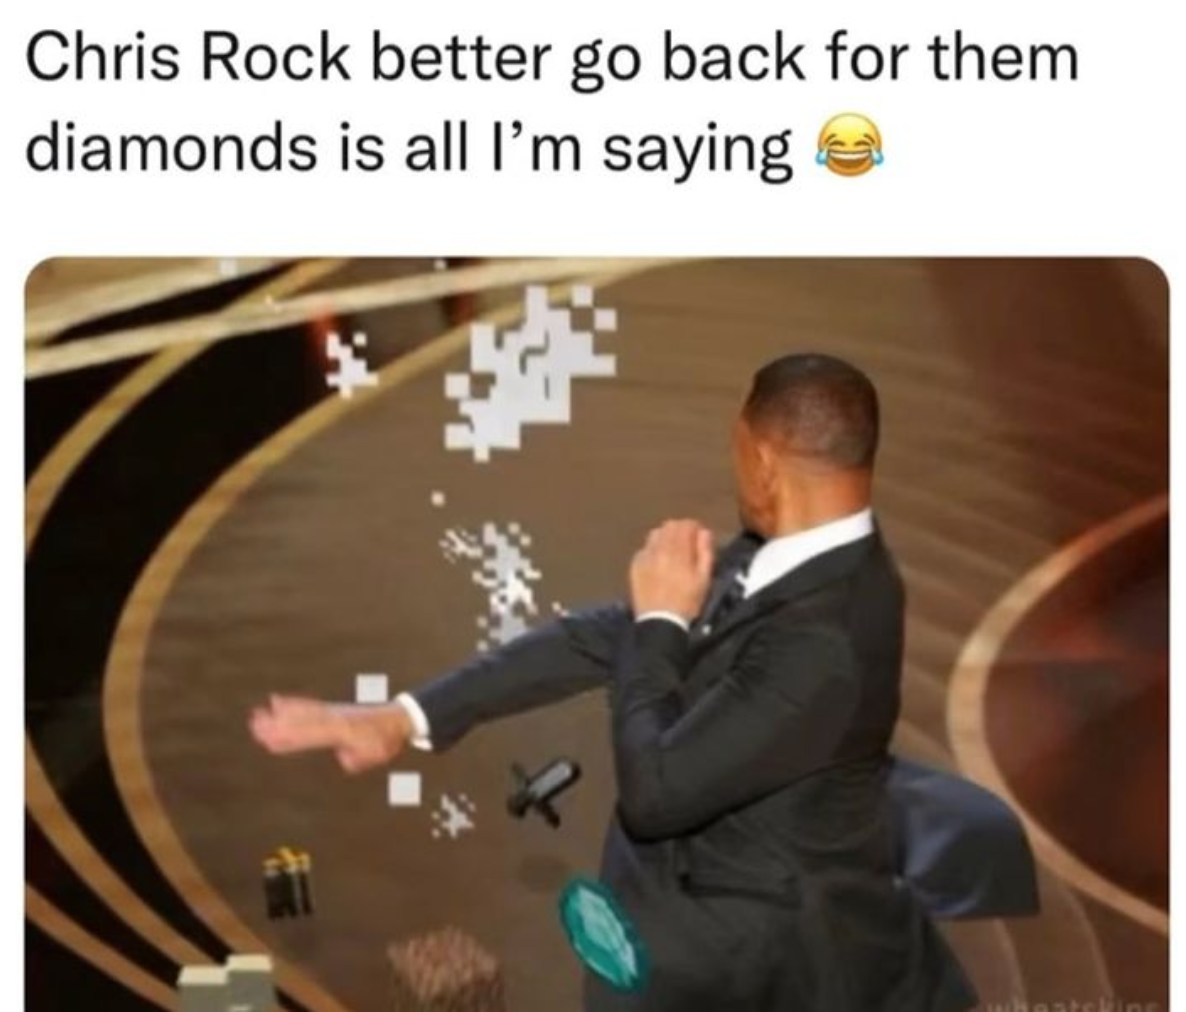 funny gaming memes - Chris Rock - Chris Rock better go back for them diamonds is all I'm saying